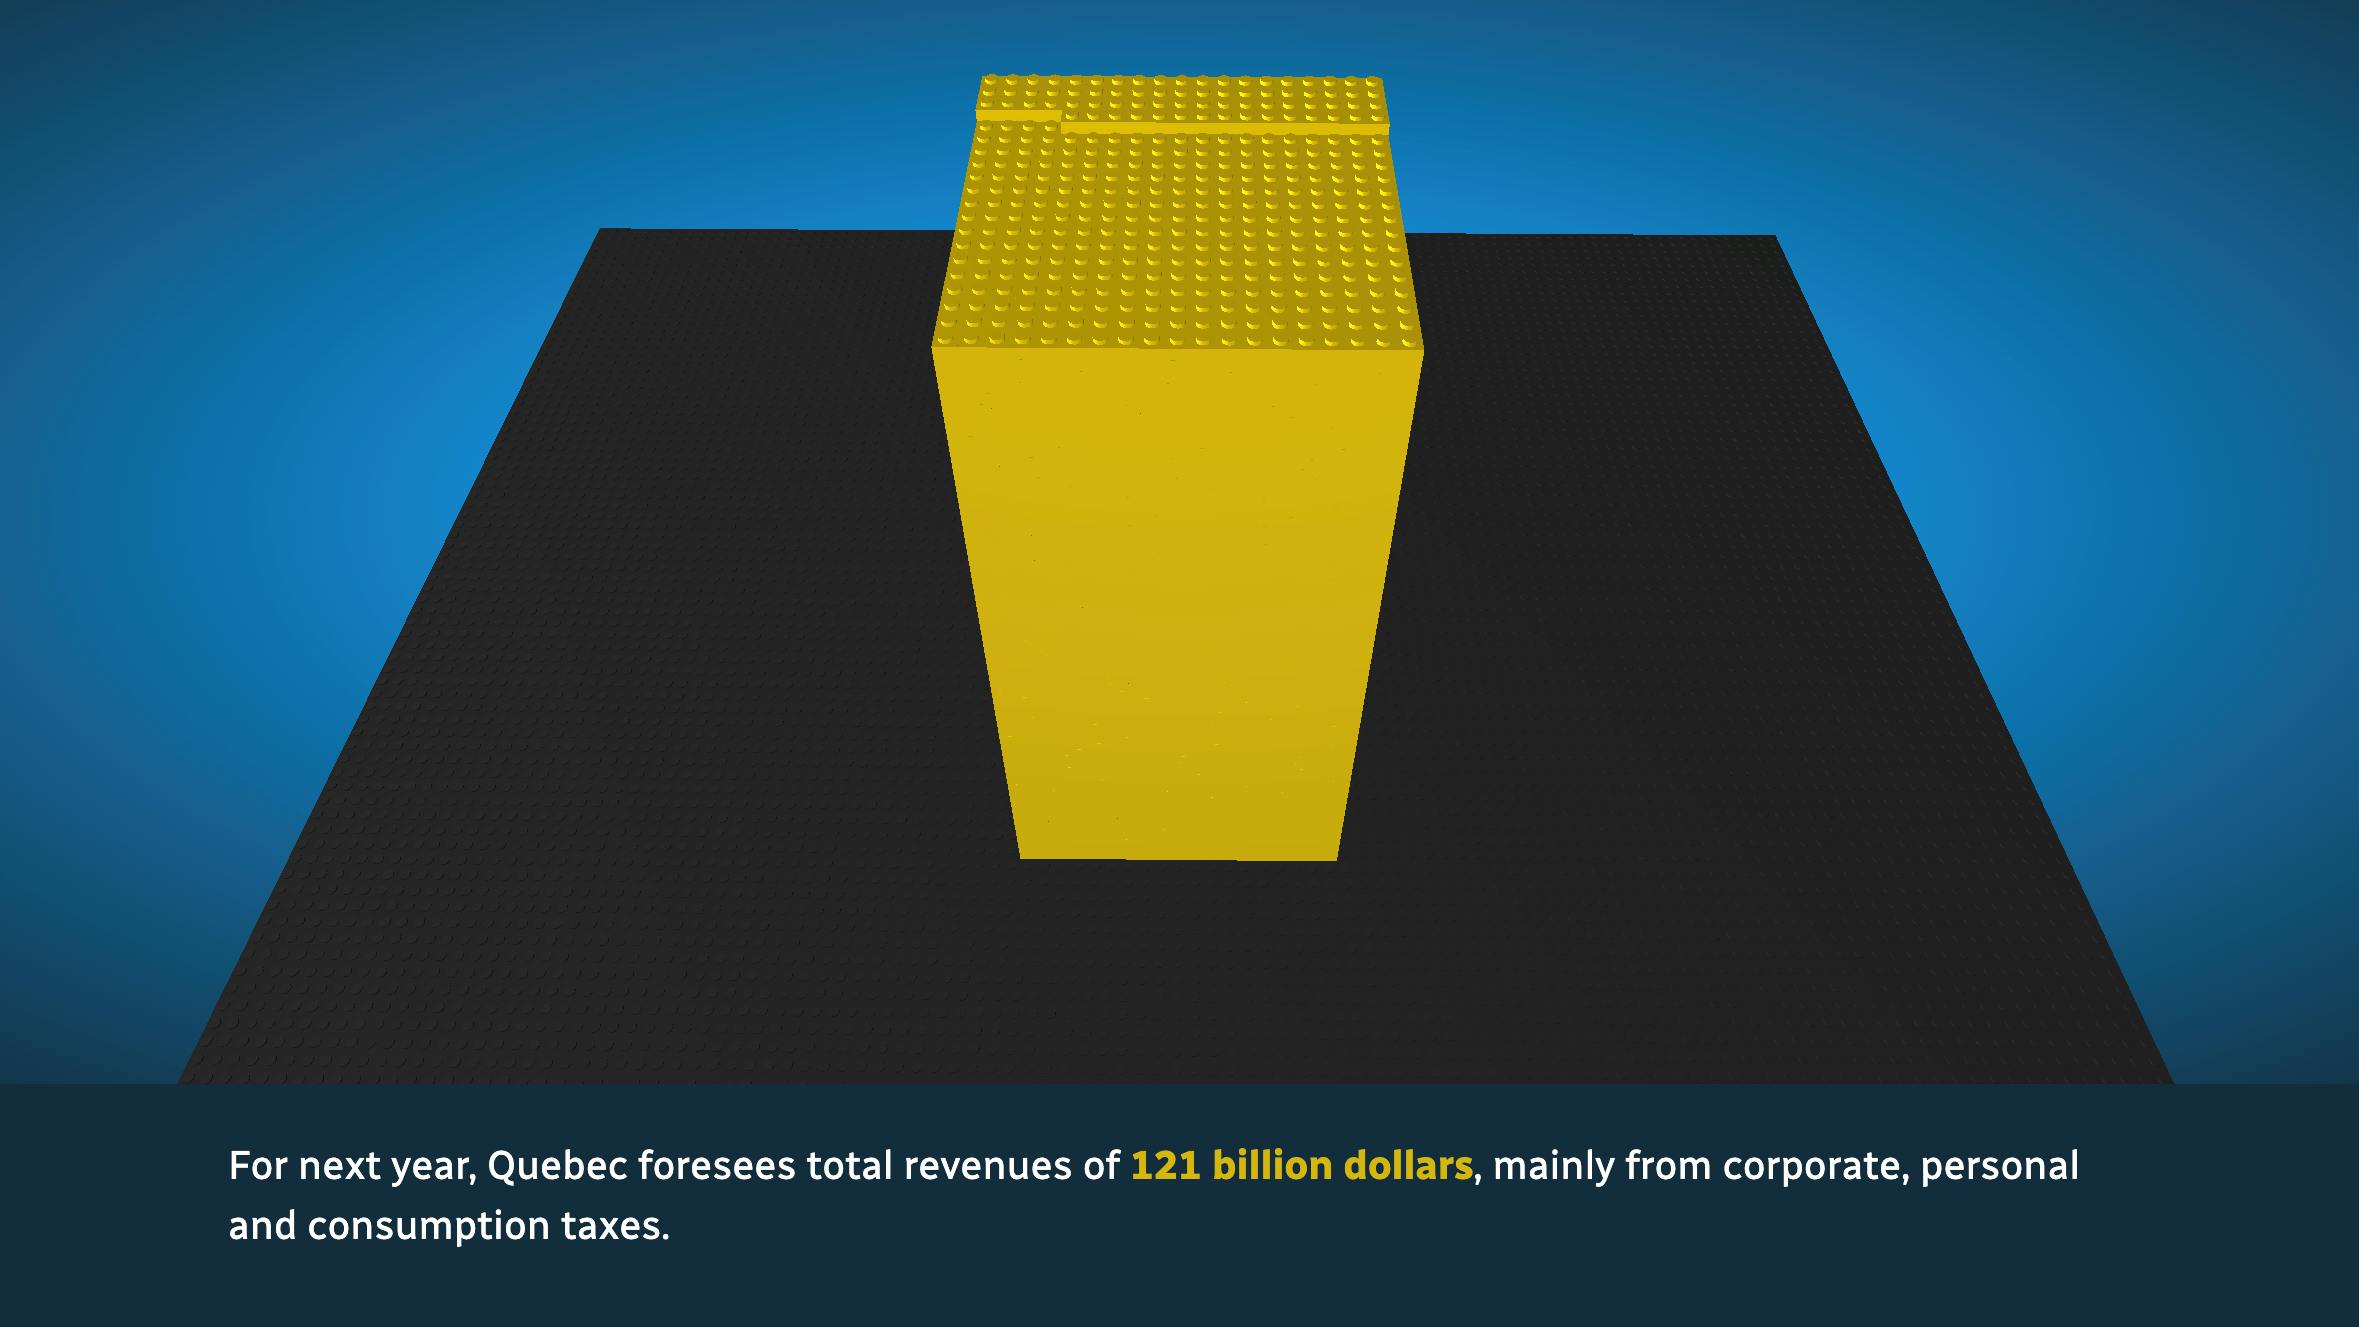 Lego blocks representing the amounts allocated in the Quebec budget.